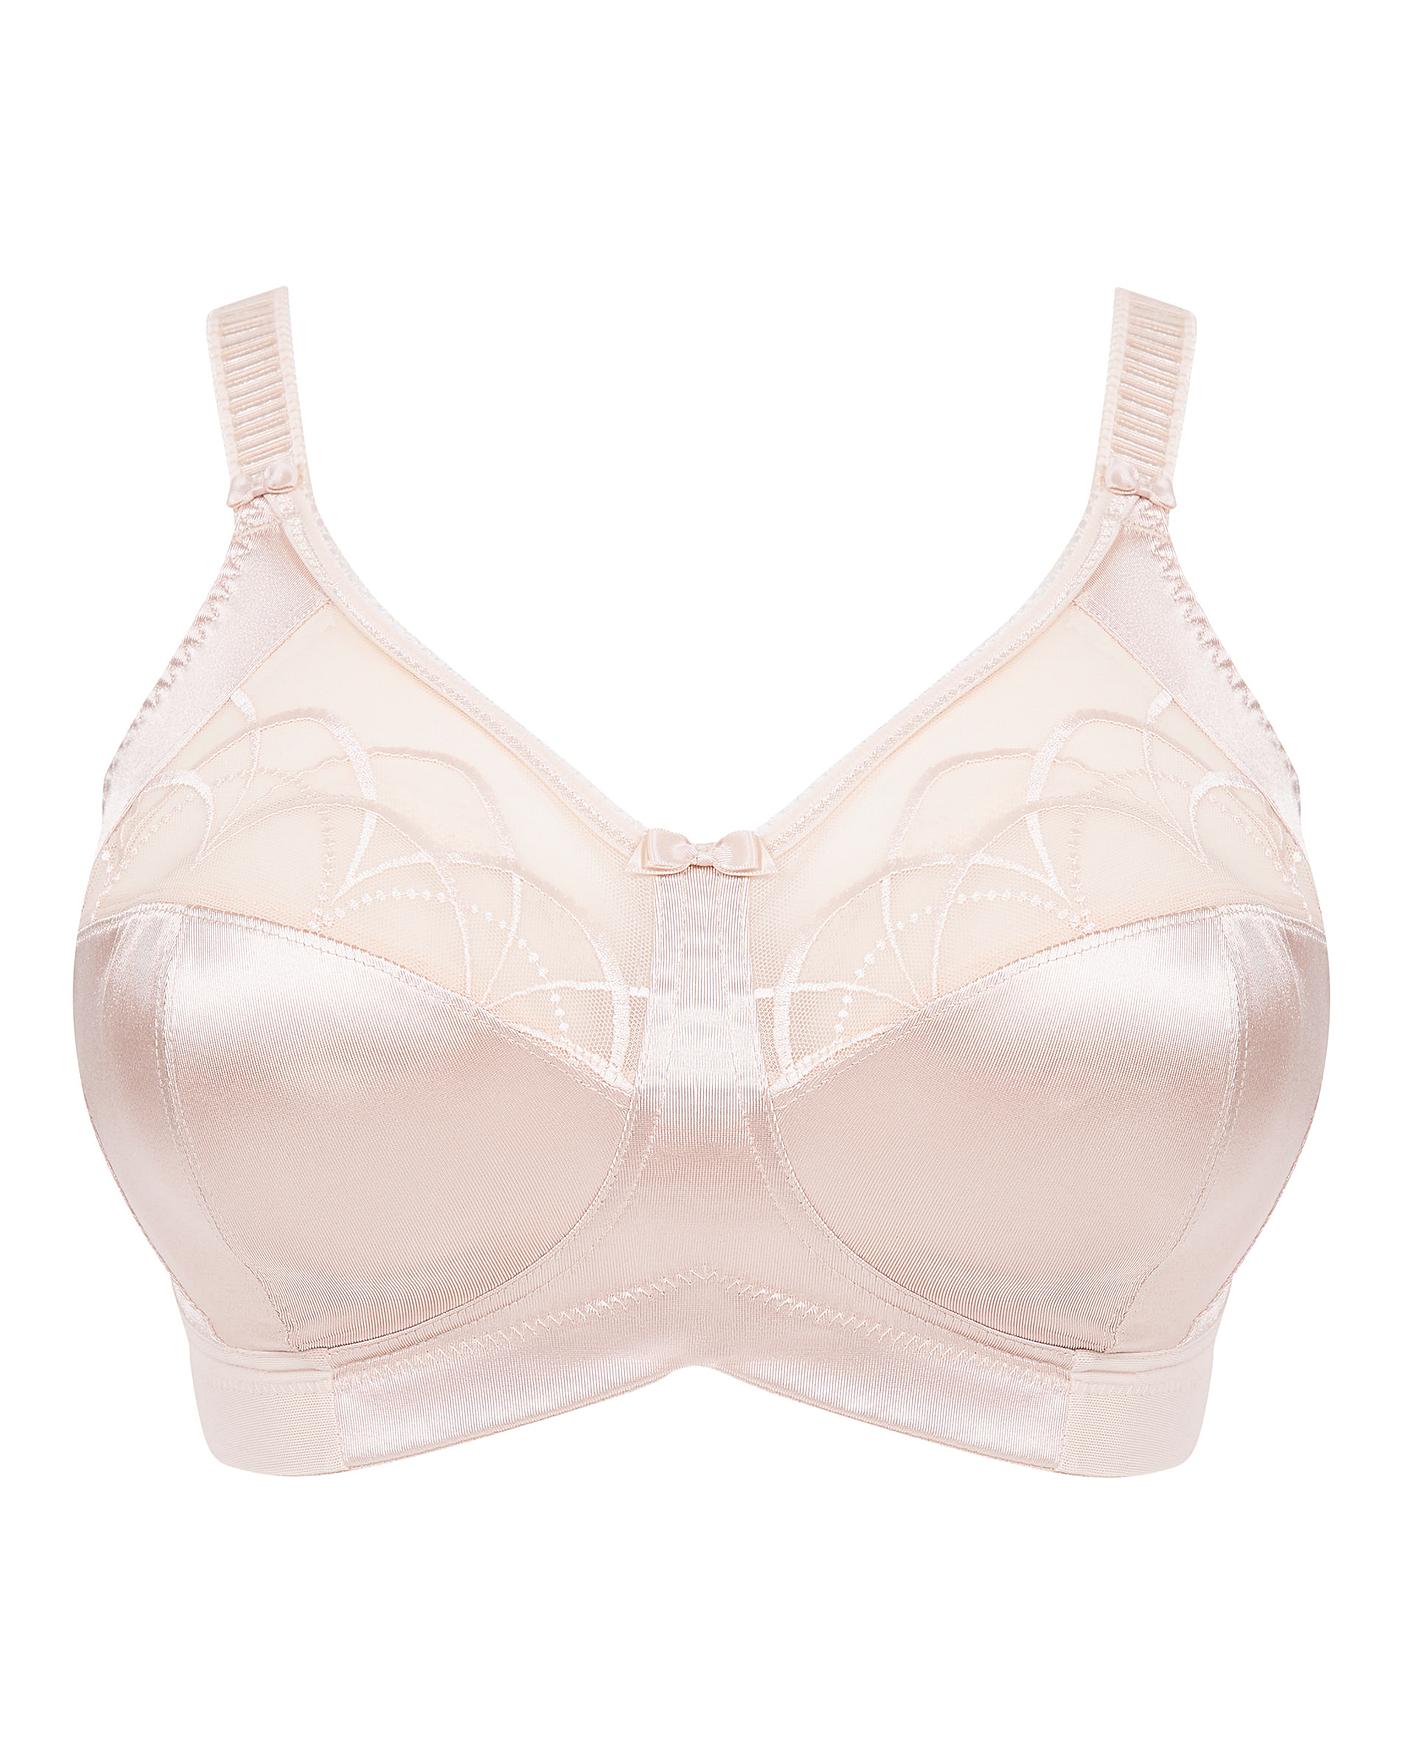 Elomi Cate Full Cup Non Wired Bra | J D Williams